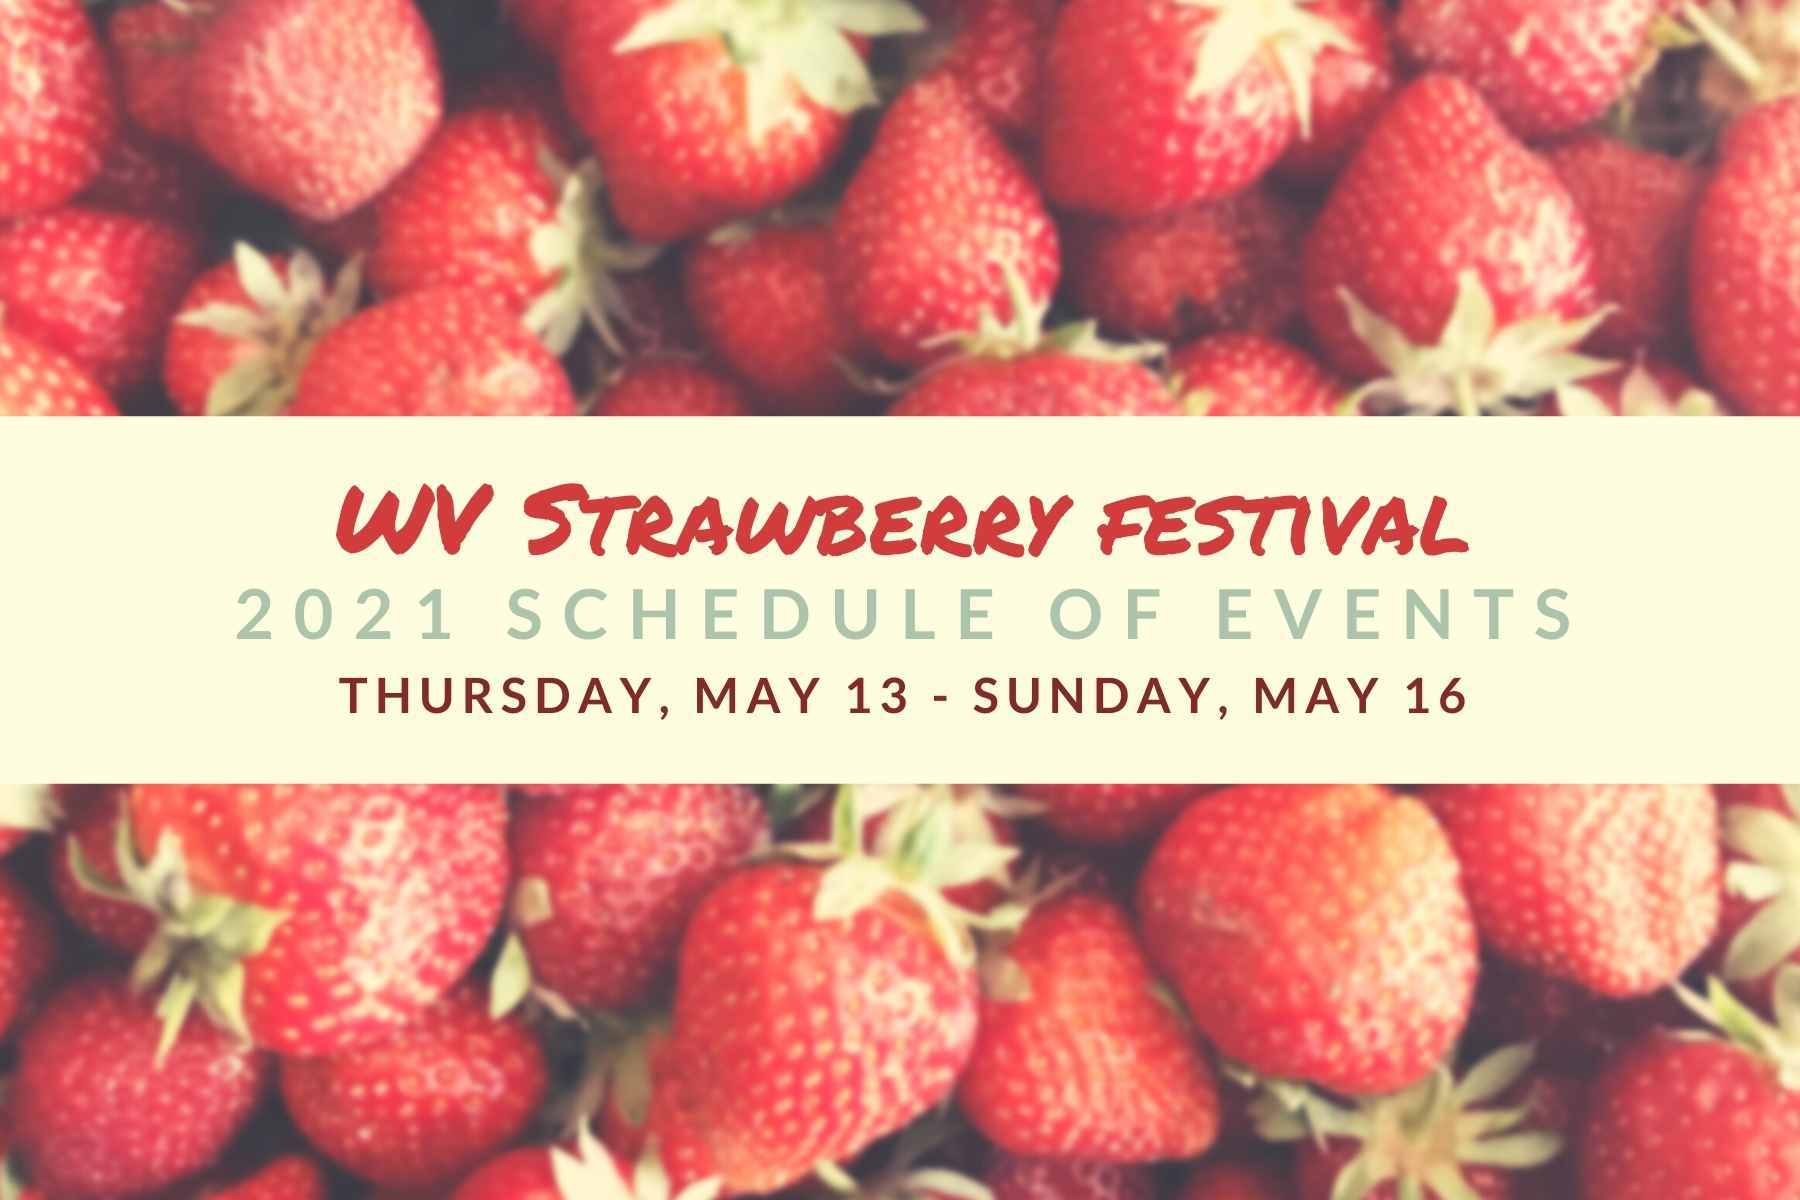 The 2021 Strawberry Festival has arrived Here's the updated schedule